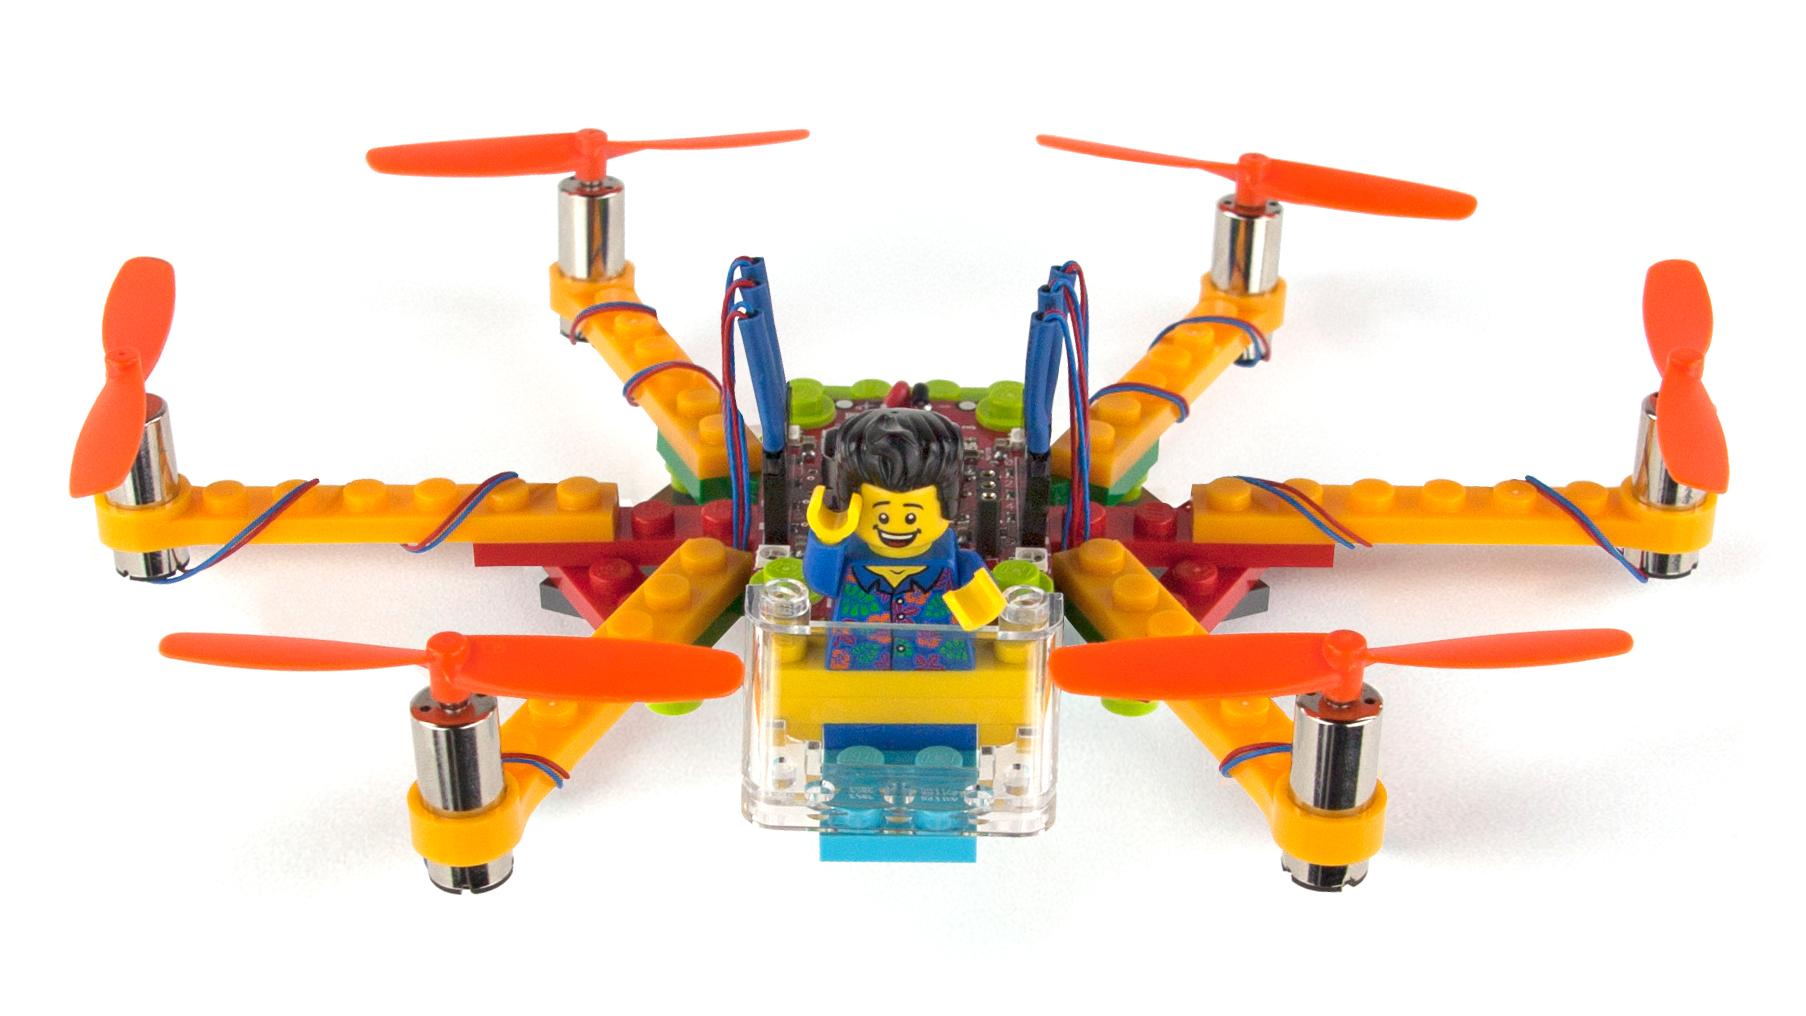 Flybrix Kits Enable You to Build Your Very Own Lego Drone